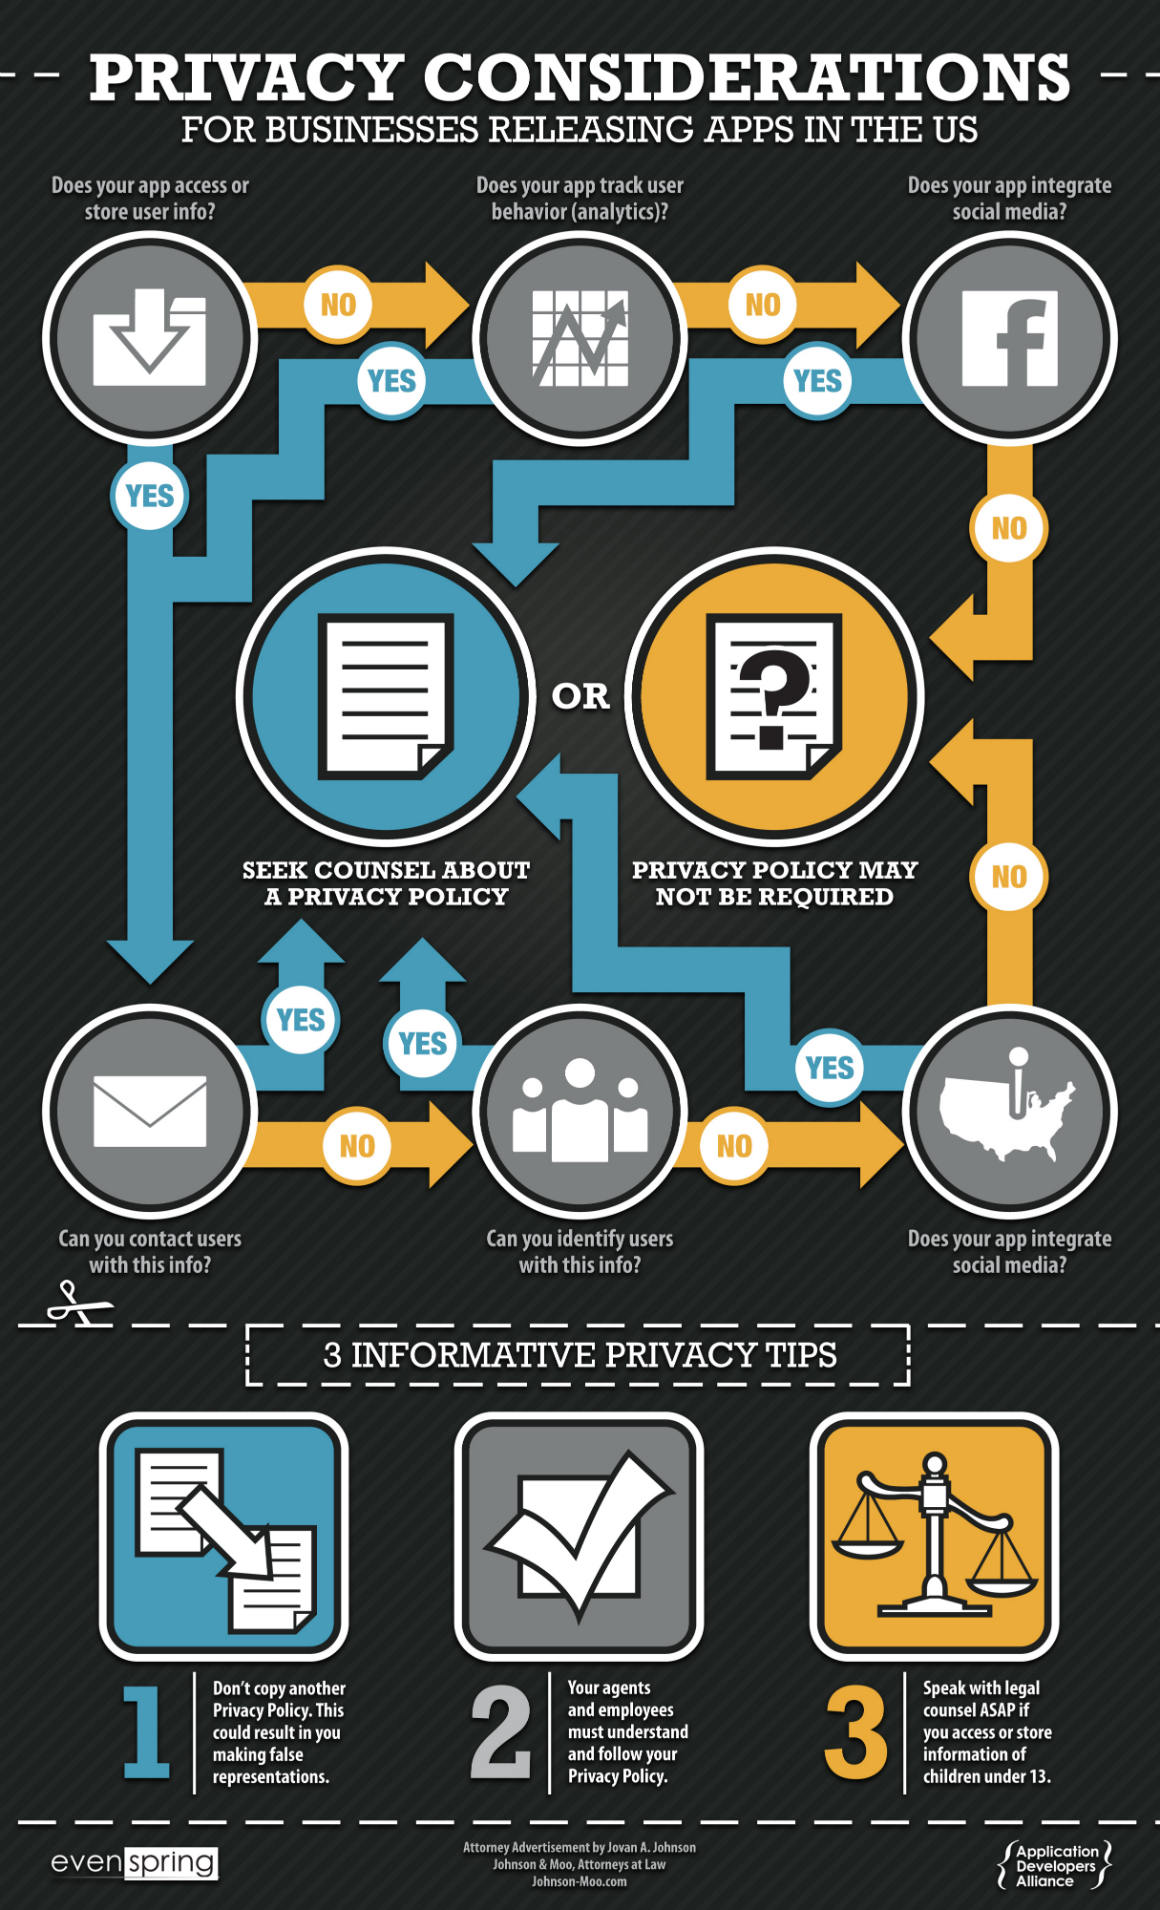 Our app privacy infographic provides both tips and a flow chart to help guide you on app privacy laws.